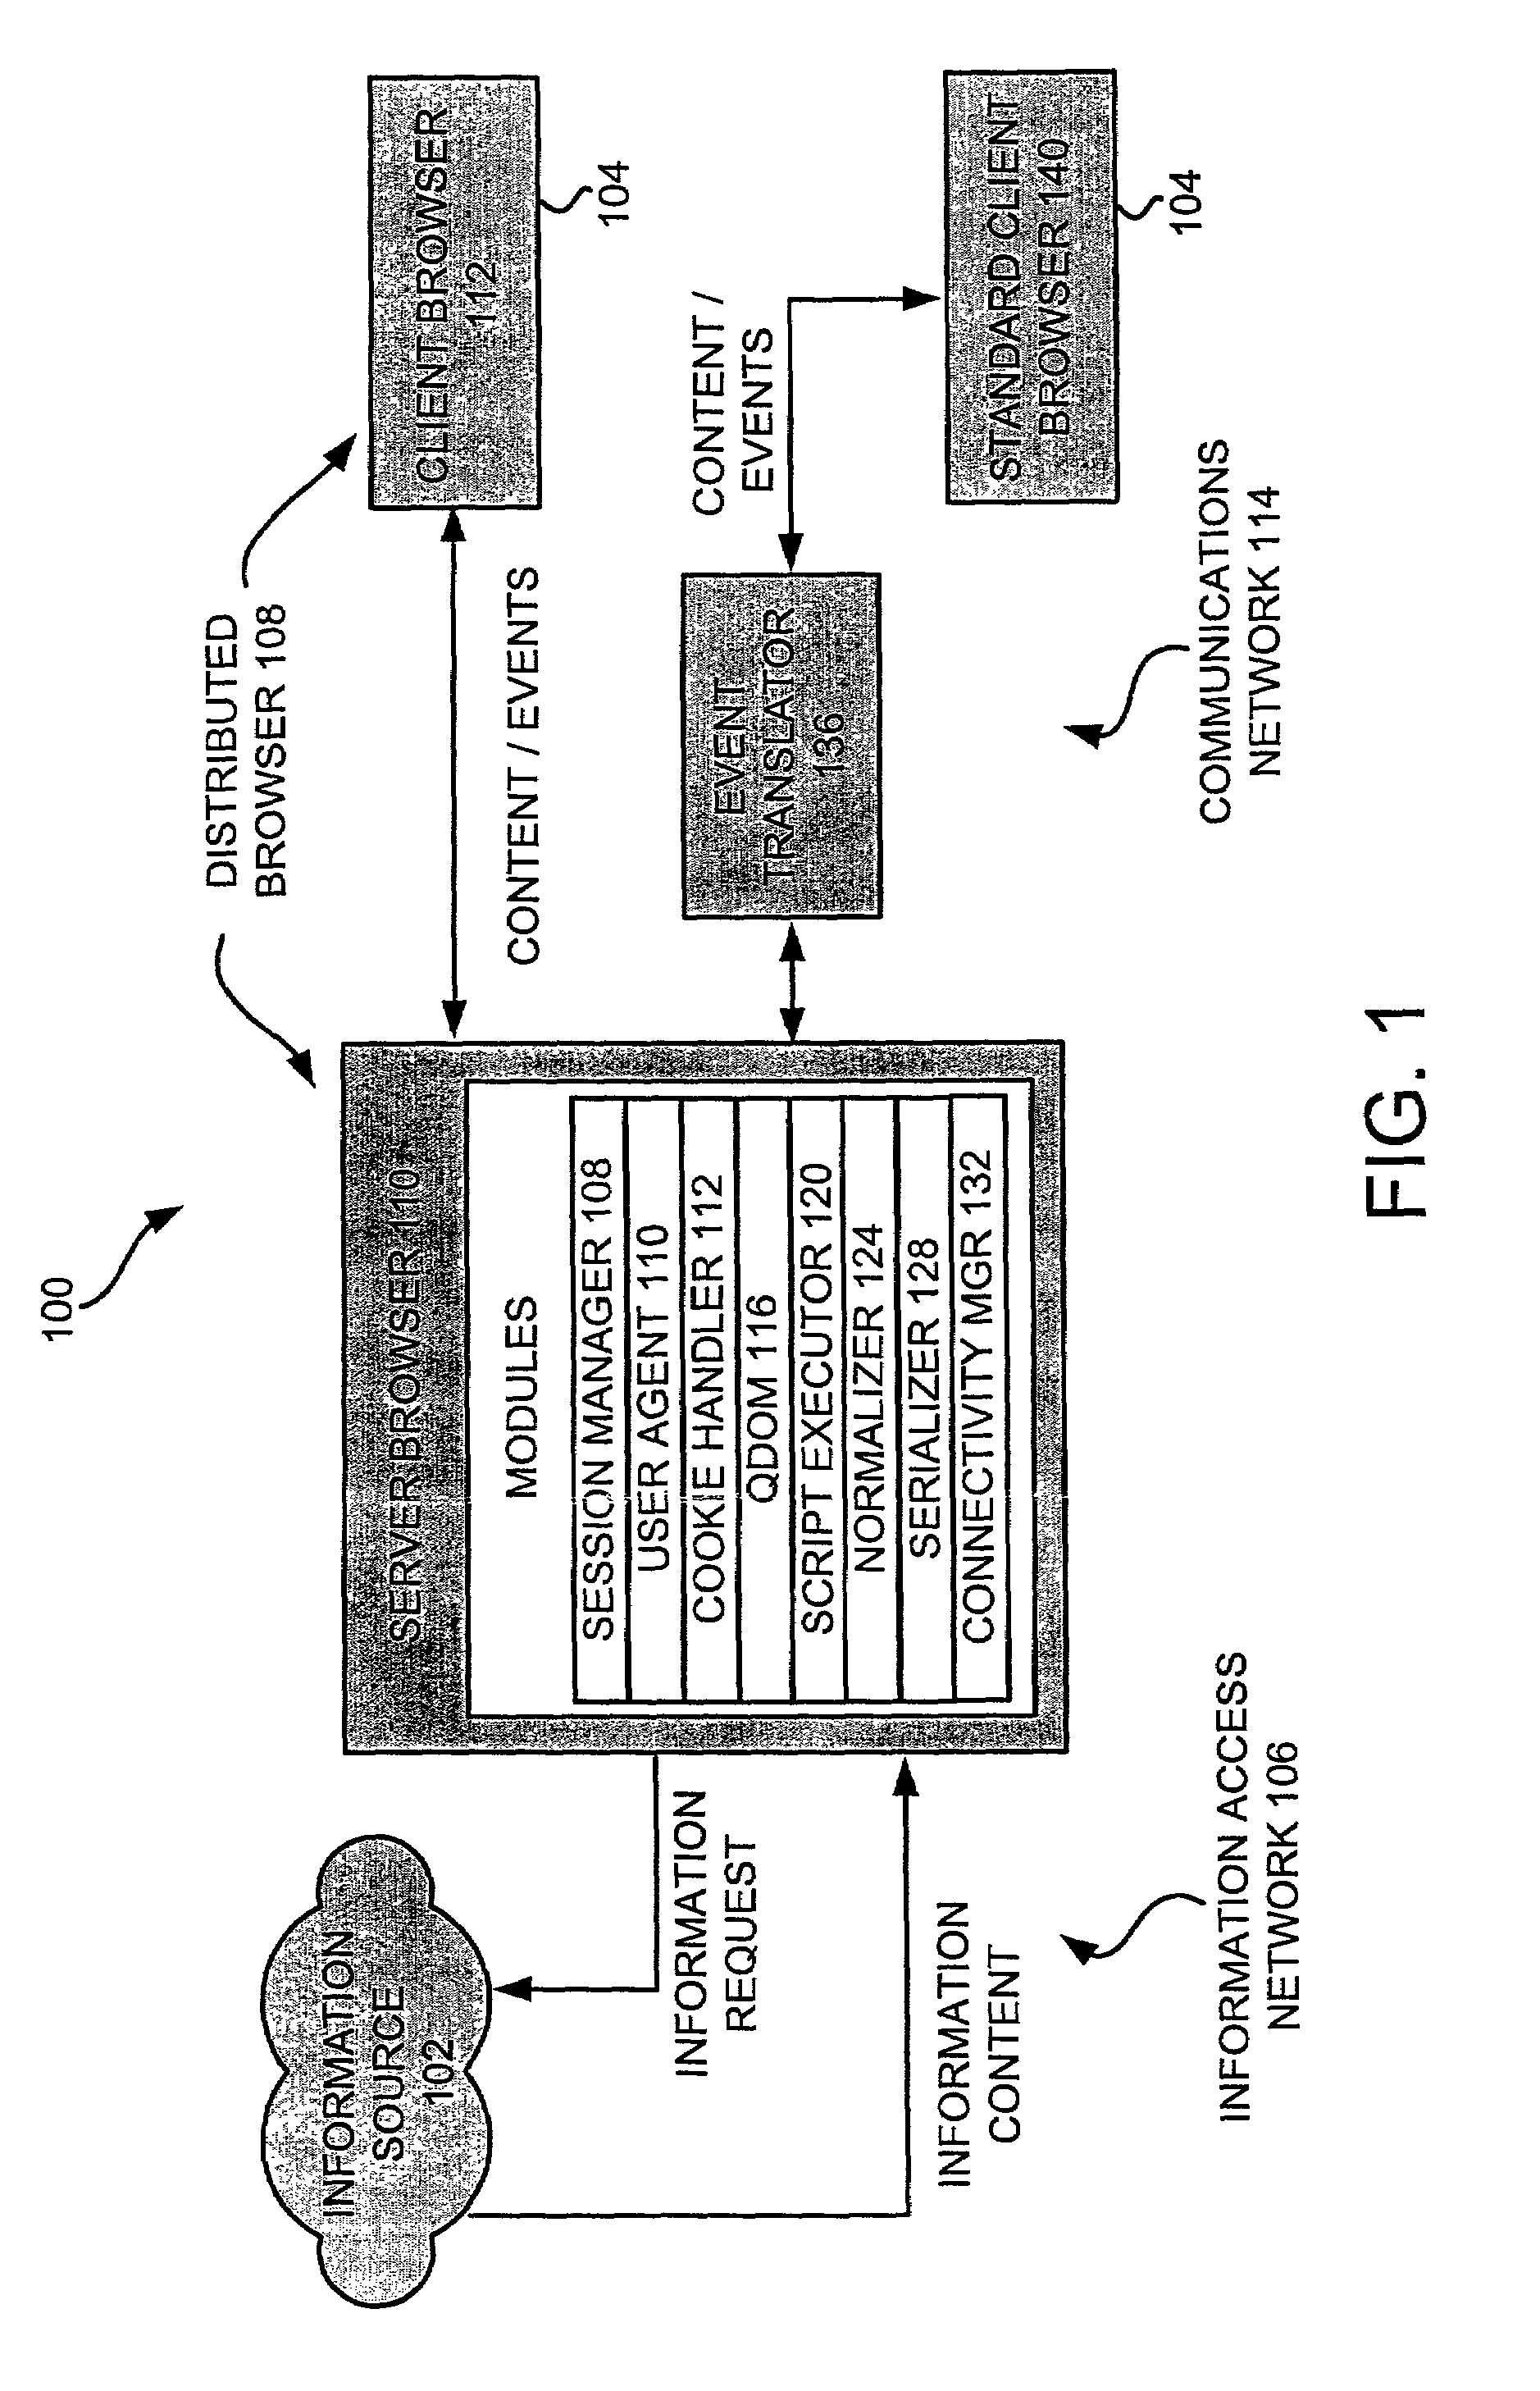 System and method for adapting information content for an electronic device